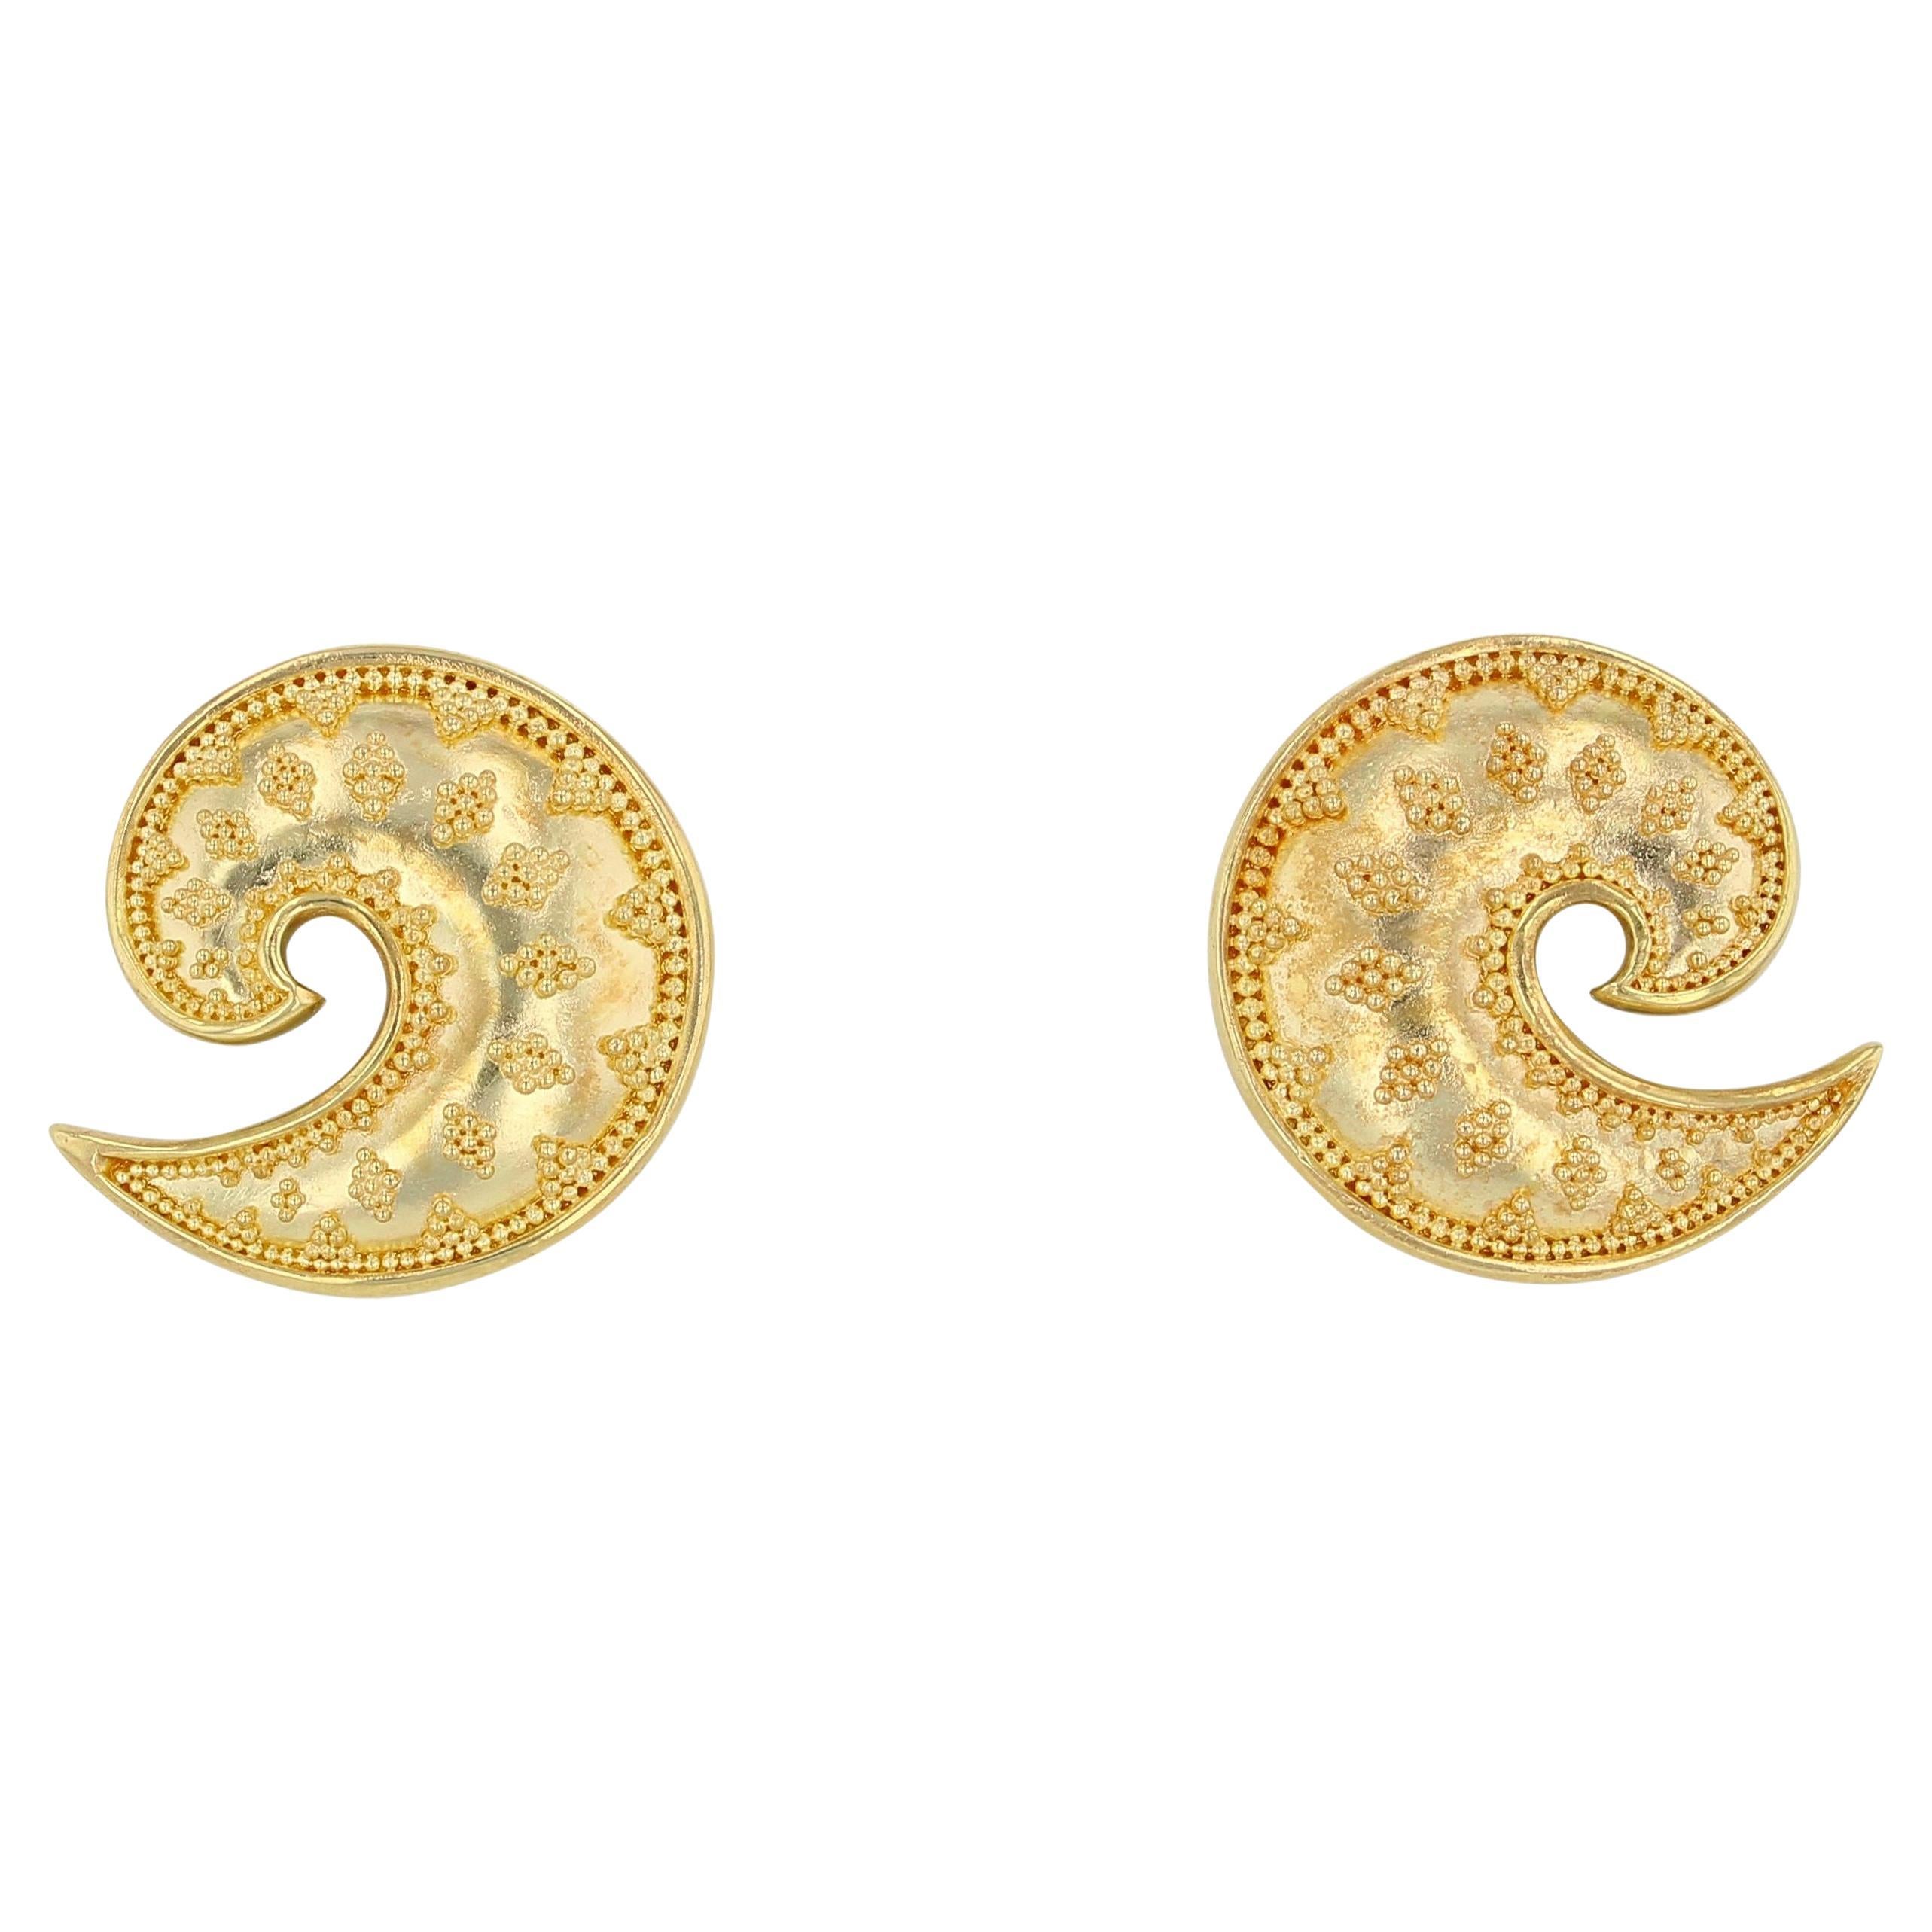 A swirl of delight is on display in these Kent Raible all gold, 18 Karat gold button earrings. In Keeping with the subtle detailing of Raible's work, note the little things that make this earring stand out... The body of this earring is not flat, it